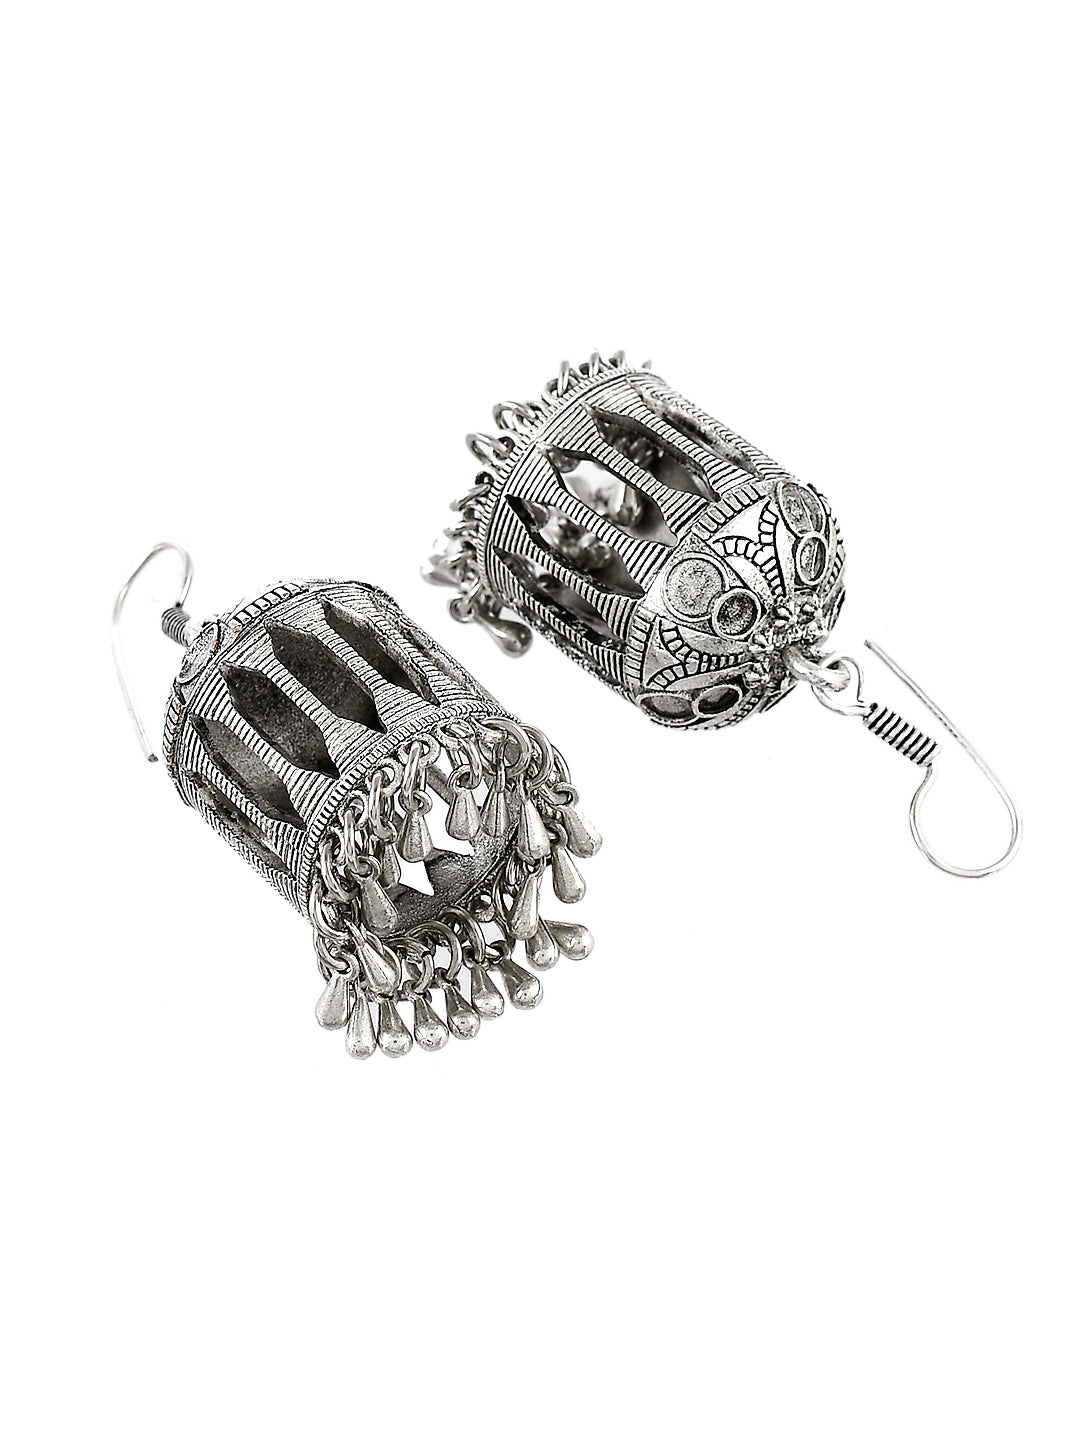 Traditional Indian Silver Plated Chandbali Jhumka Earrings Long Chandelier  — Discovered